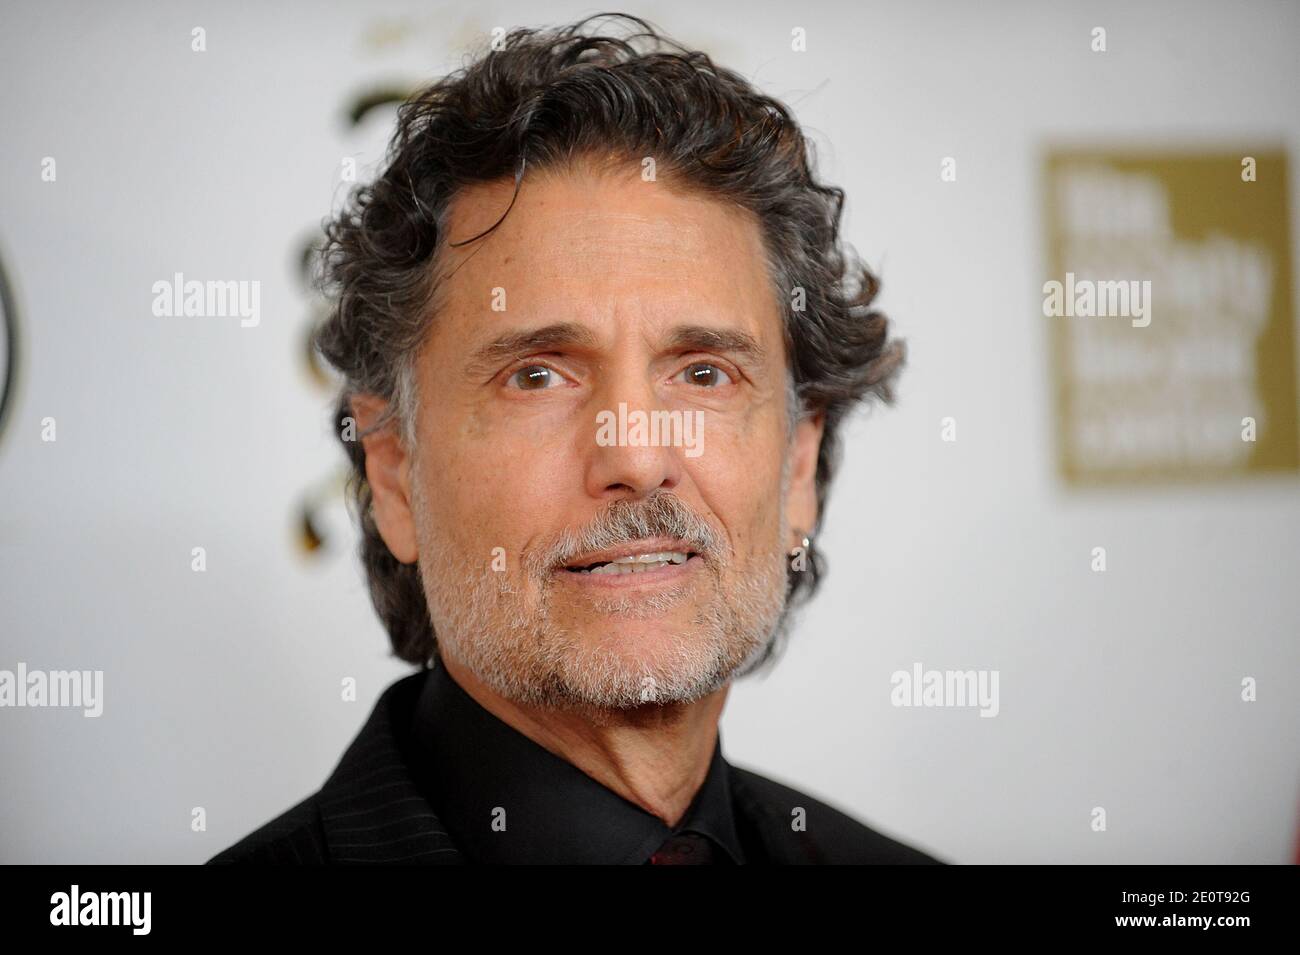 Chris Sarandon attending 'The Princess Bride' screening during the 2012 New York Film Festival at Alice Tully Hall in New York City, NY, USA, on October 0, 2012. Photo by Brad Barket/ABACAPRESS.COM Stock Photo